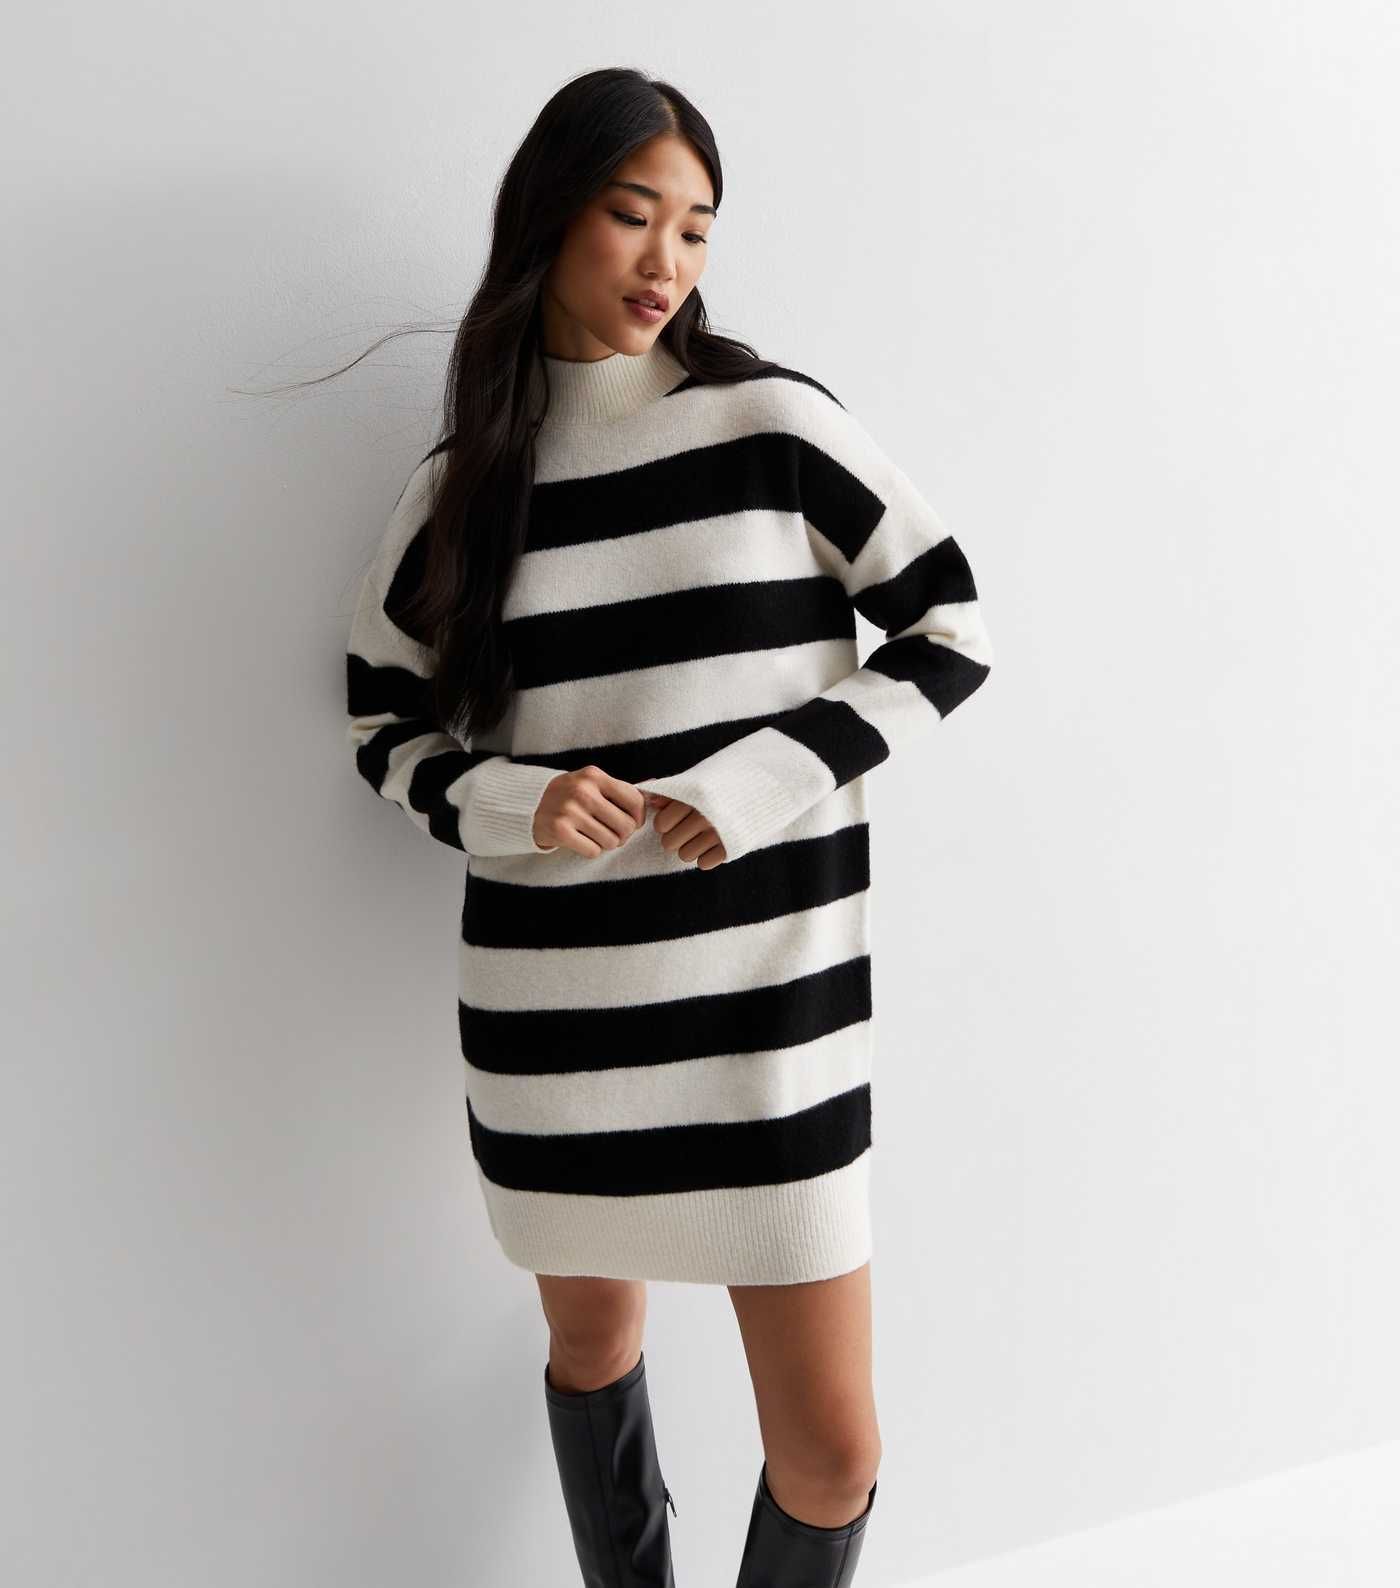 Off White Stripe Knit High Neck Mini Dress
						
						Add to Saved Items
						Remove from Save... | New Look (UK)